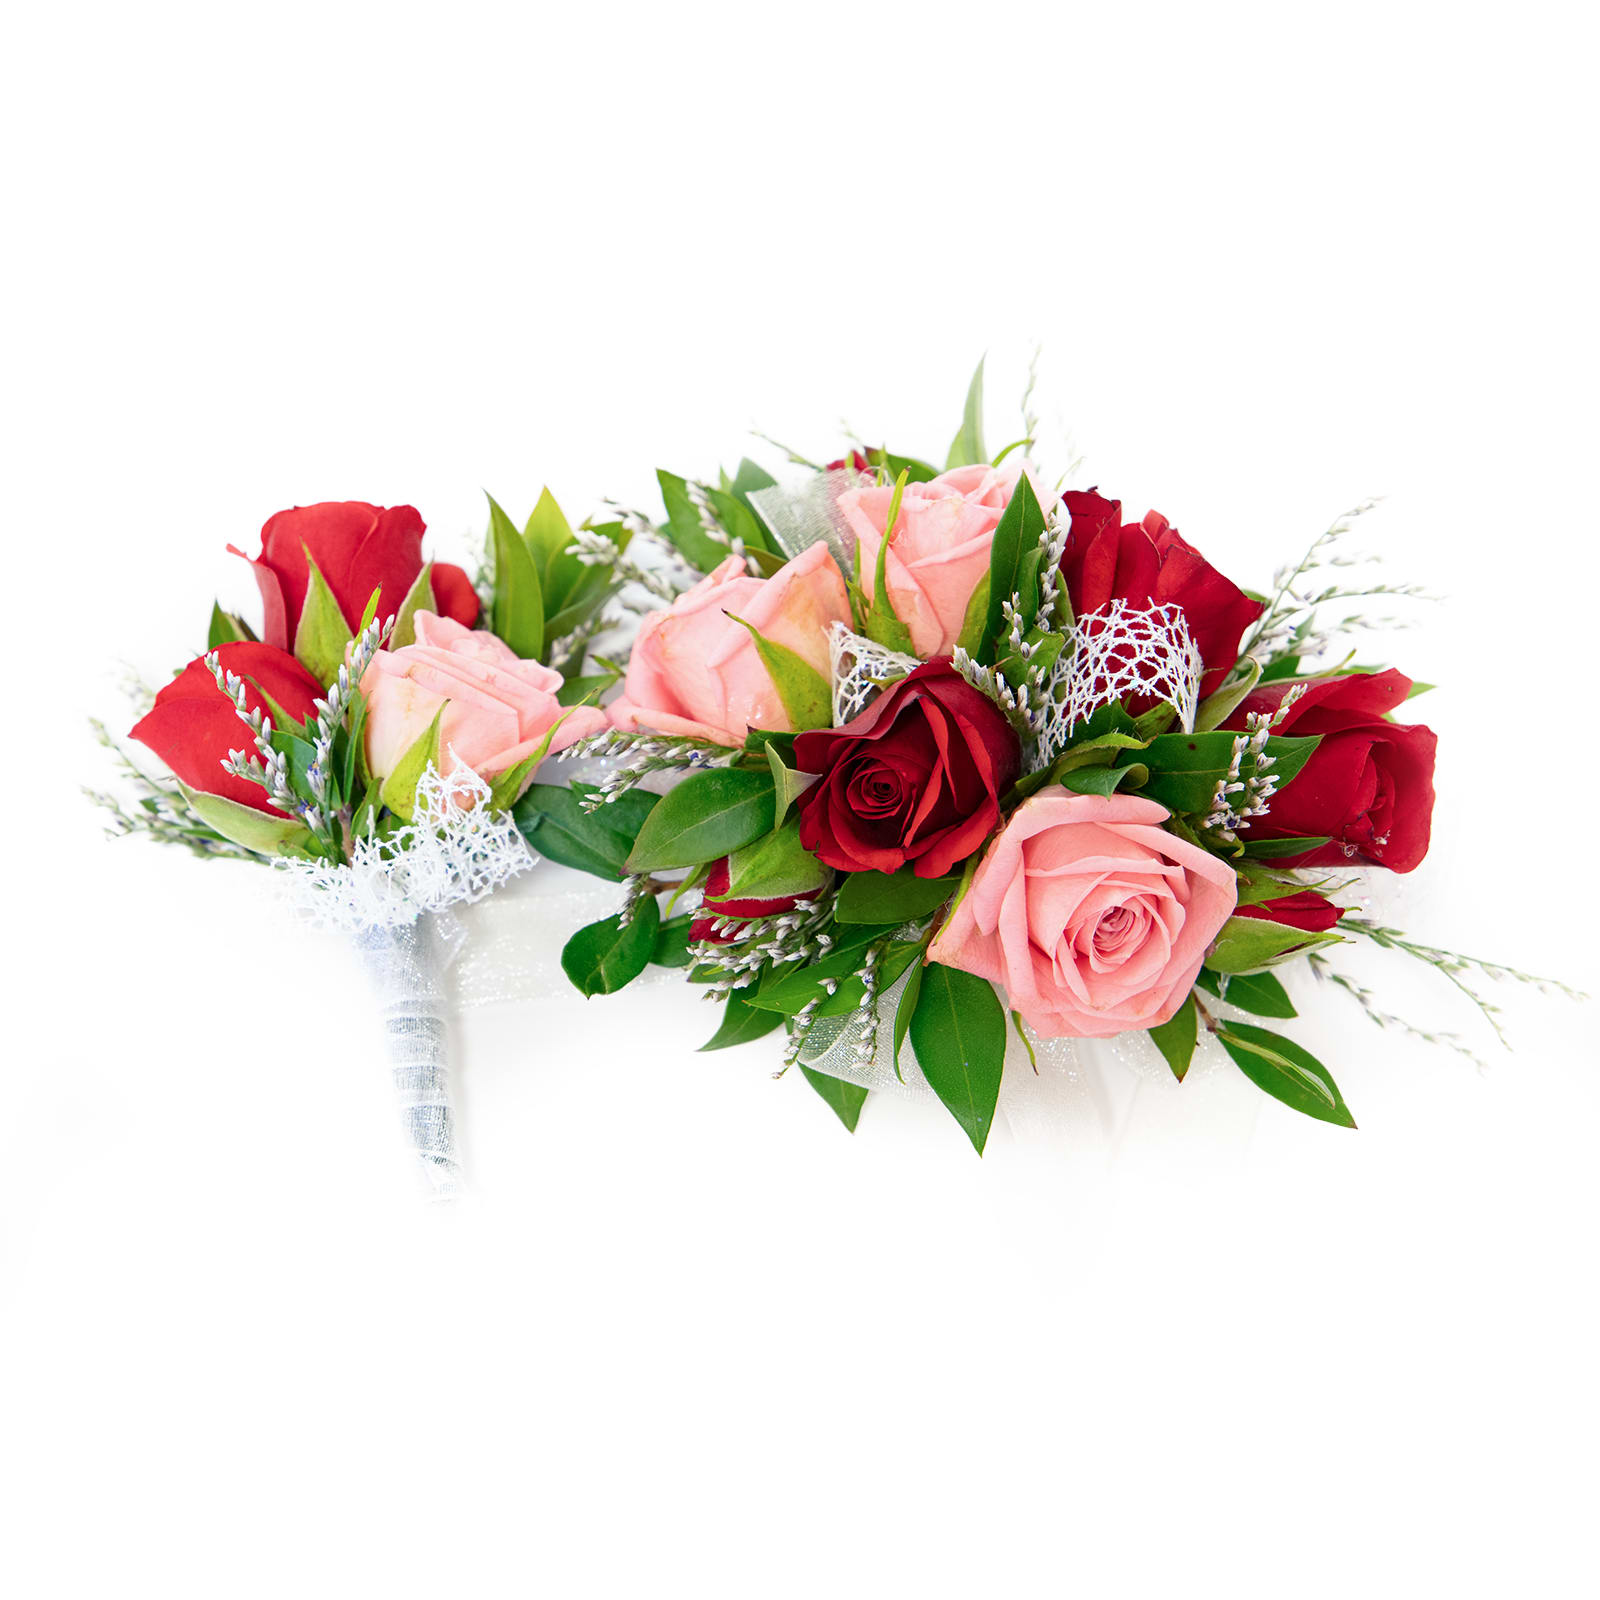 Corsage & Boutonniere Bundle in Reno, NV | The Florist at Moana Nursery